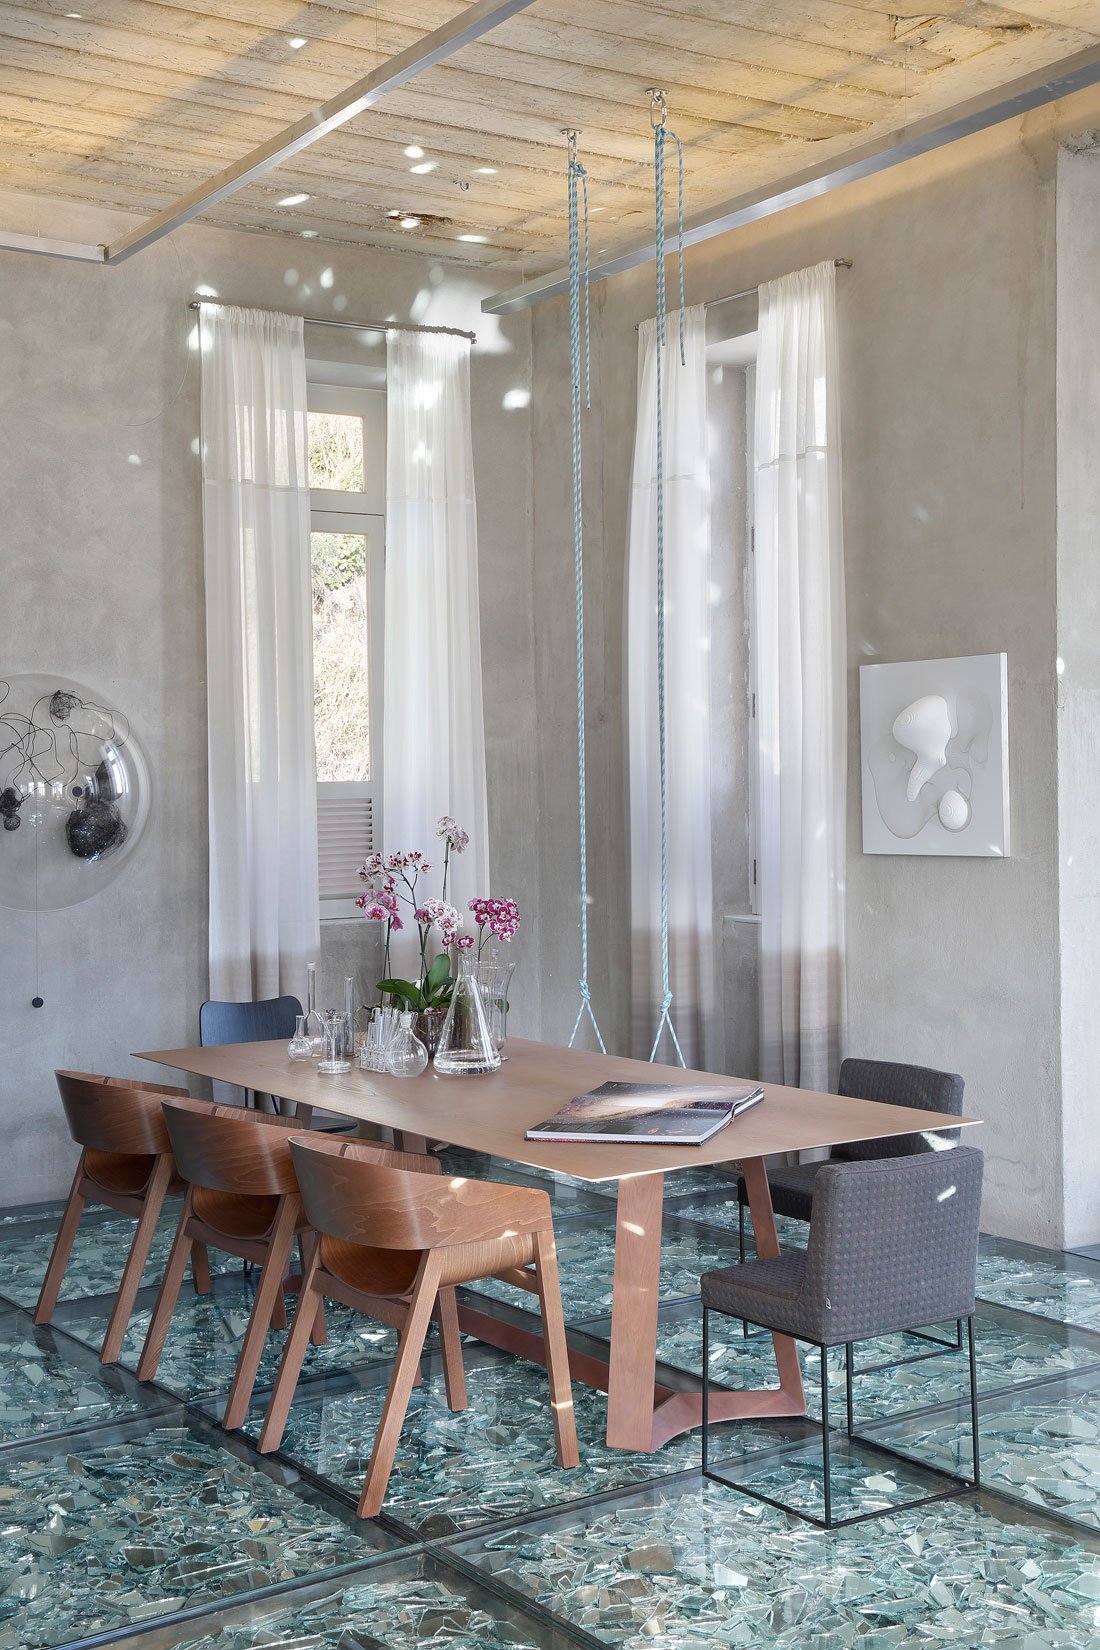 Stylish and Eclectic Design with Broken Glass Floor of Lab LZ for Casa Cor Rio 2015 by Giselle Taranto Architecture-24